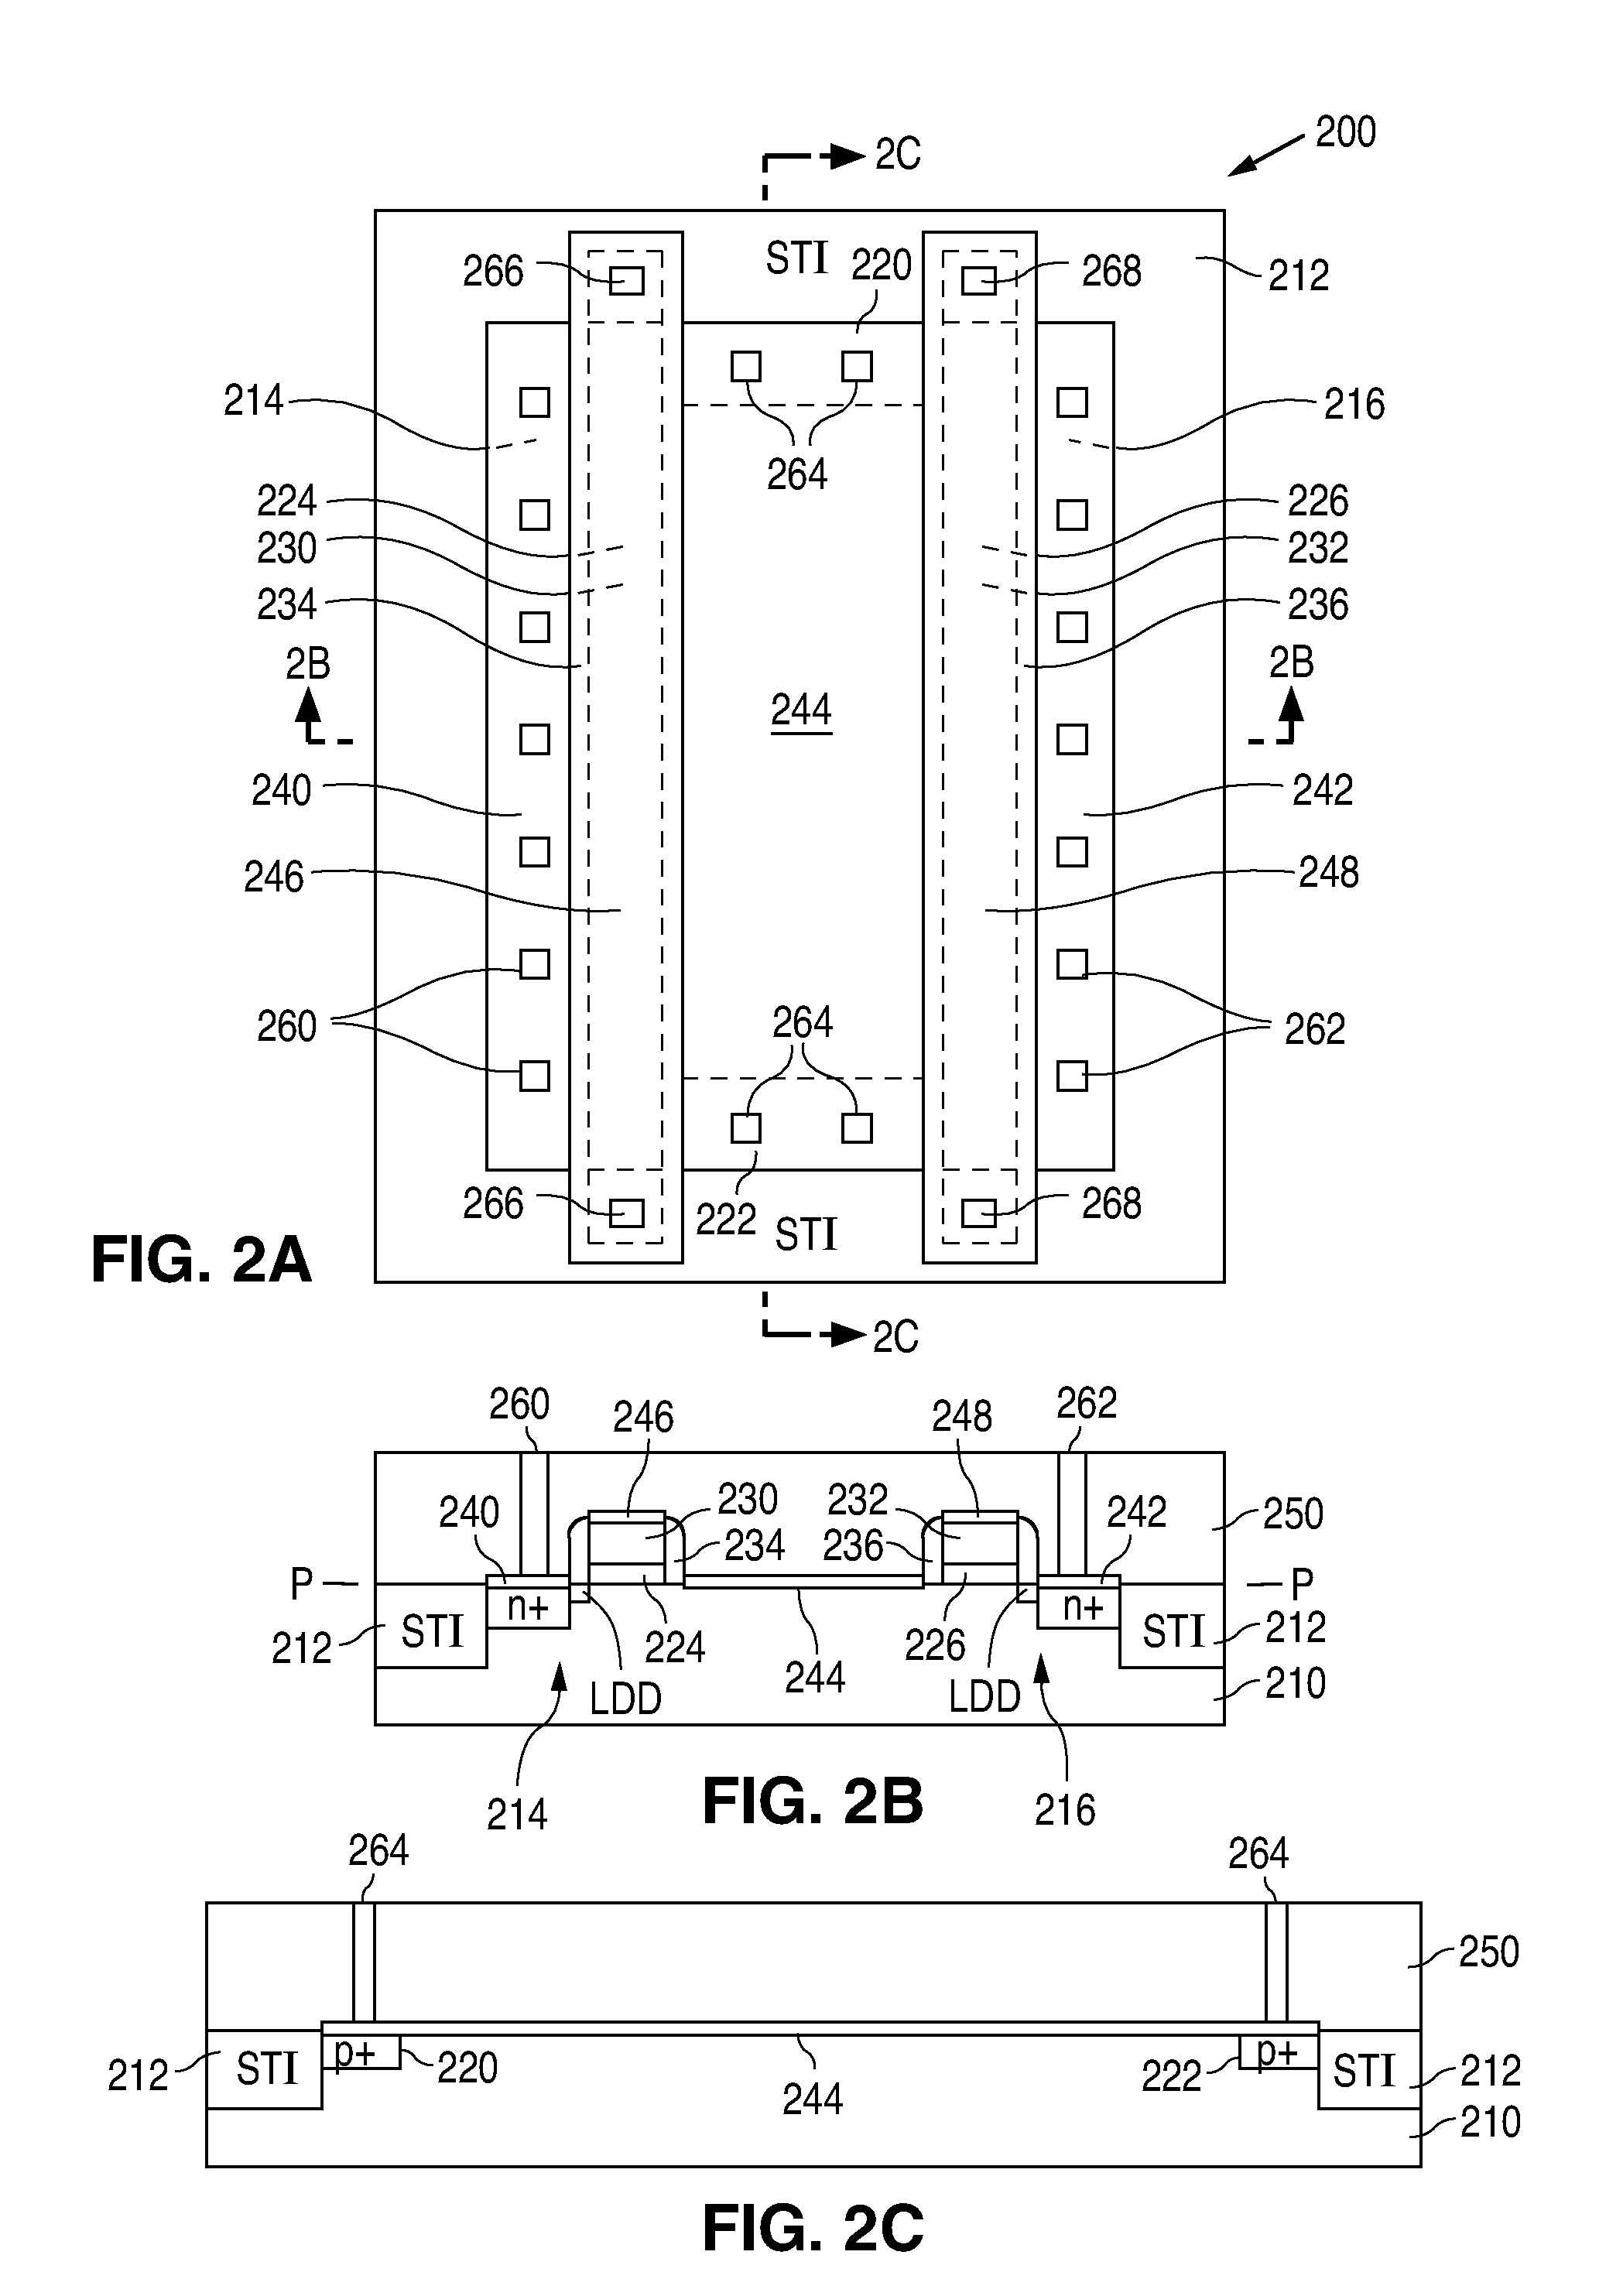 Schottky Diode with Control Gate for Optimization of the On State Resistance, the Reverse Leakage, and the Reverse Breakdown